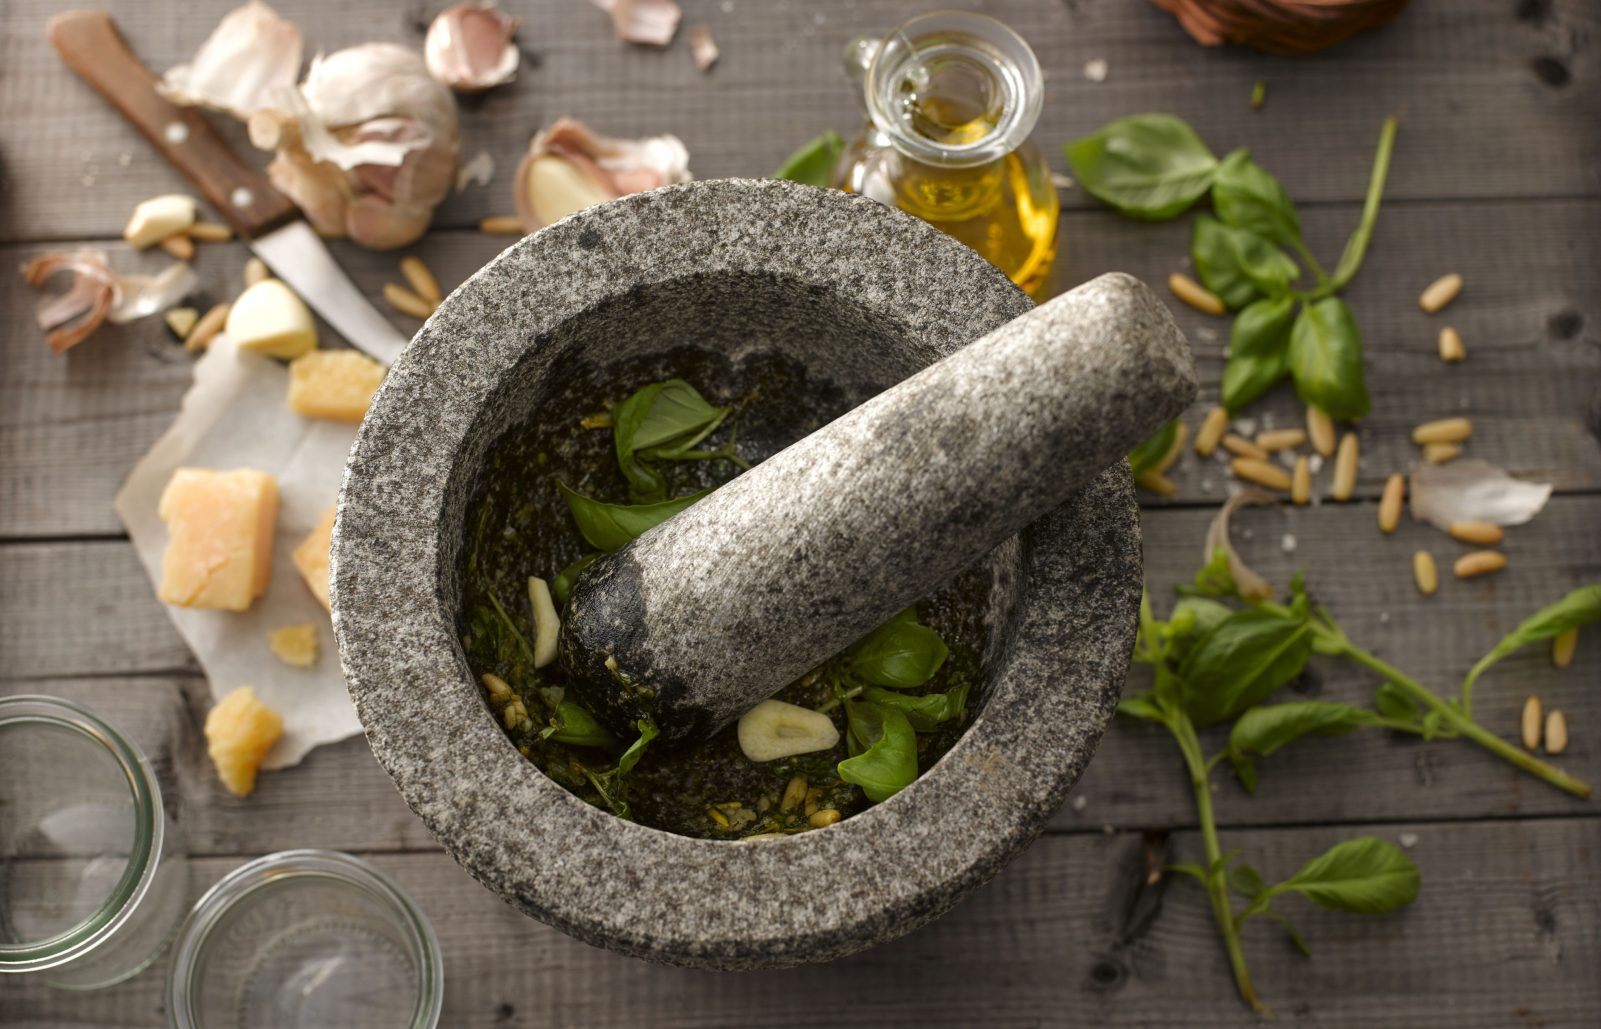 If You Own at Least 8 of Things, You Should Be a Chef Quiz pestle and mortar